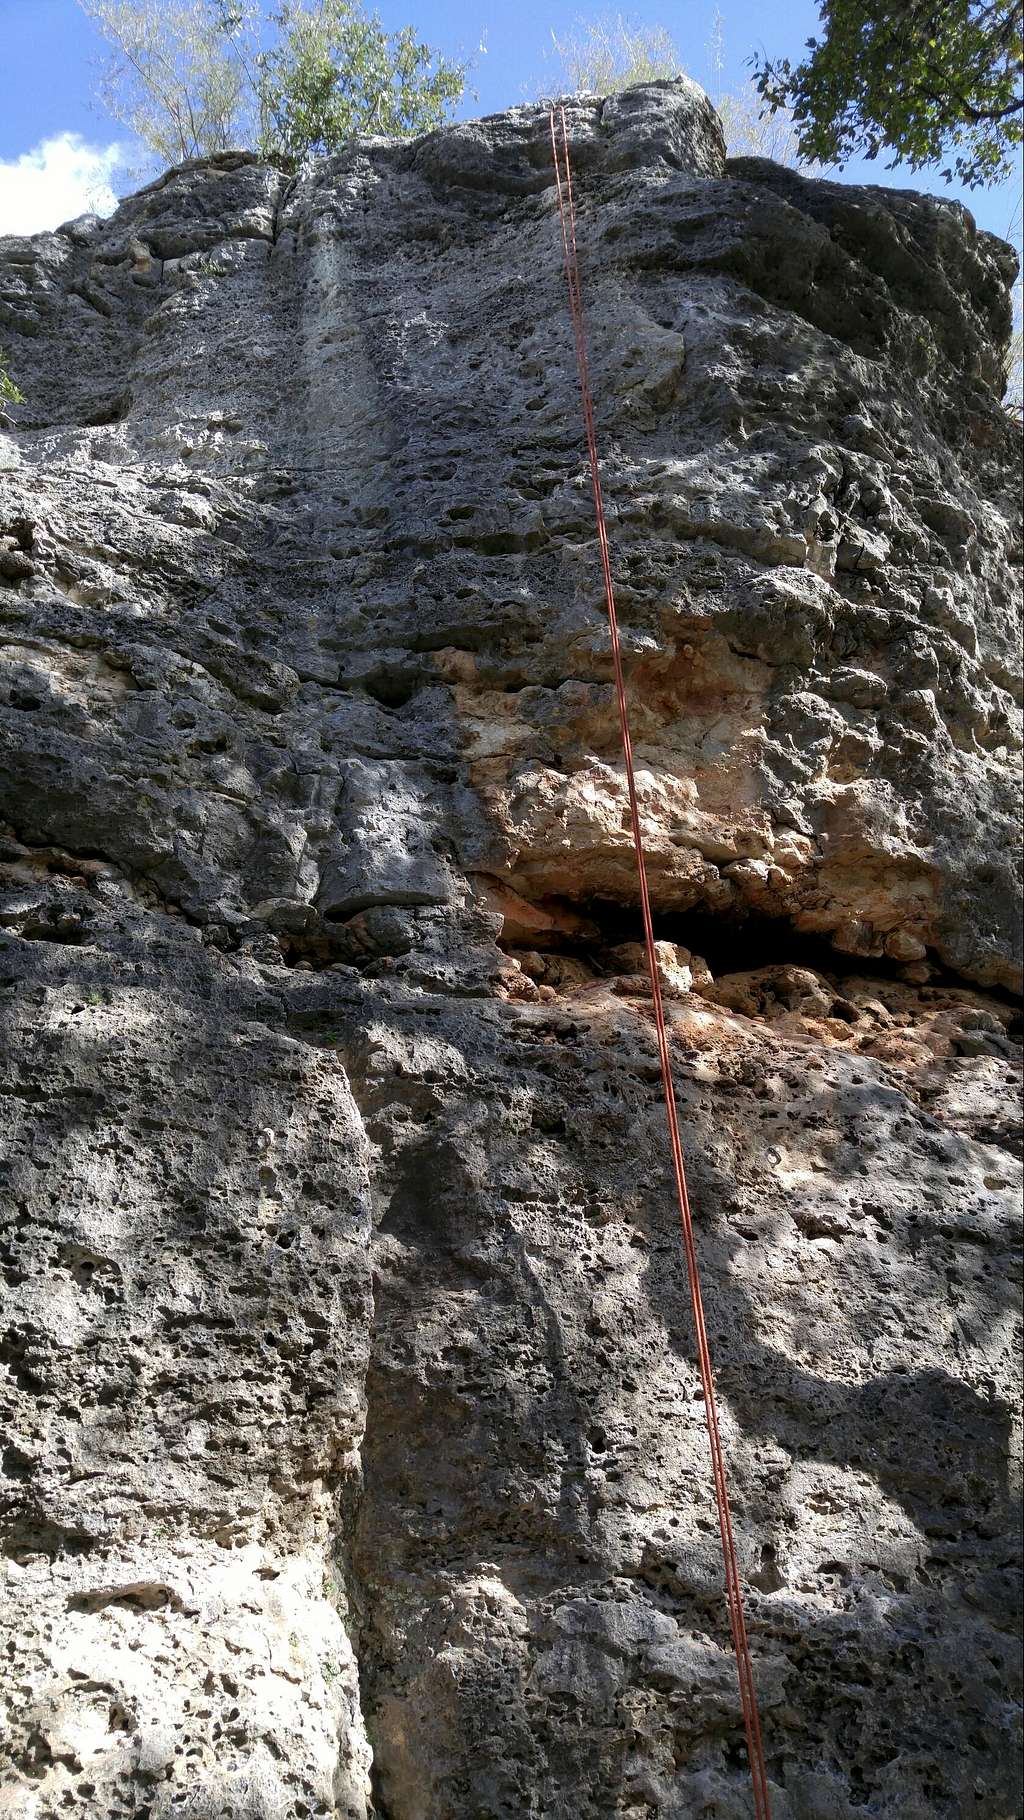 Slither (5.6) and El Primero (5.9)